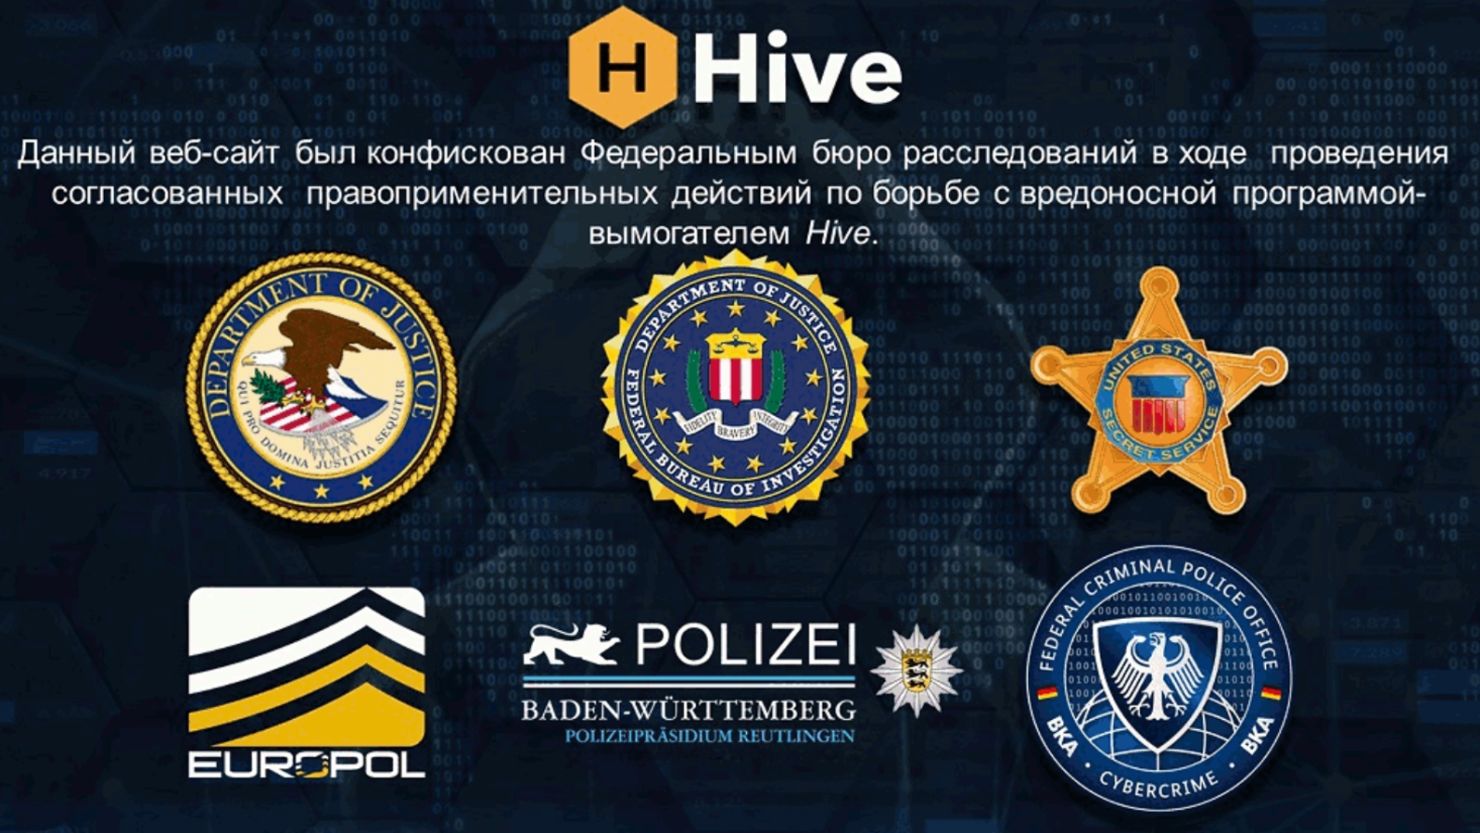 This screengrab captured by CNN shows a website hosted by Hive Ransomware seized by the FBI. The website, in Russian, says, "The Federal Bureau of Investigation seized this site as part of a coordinated law enforcement action taken against Hive Ransomware."